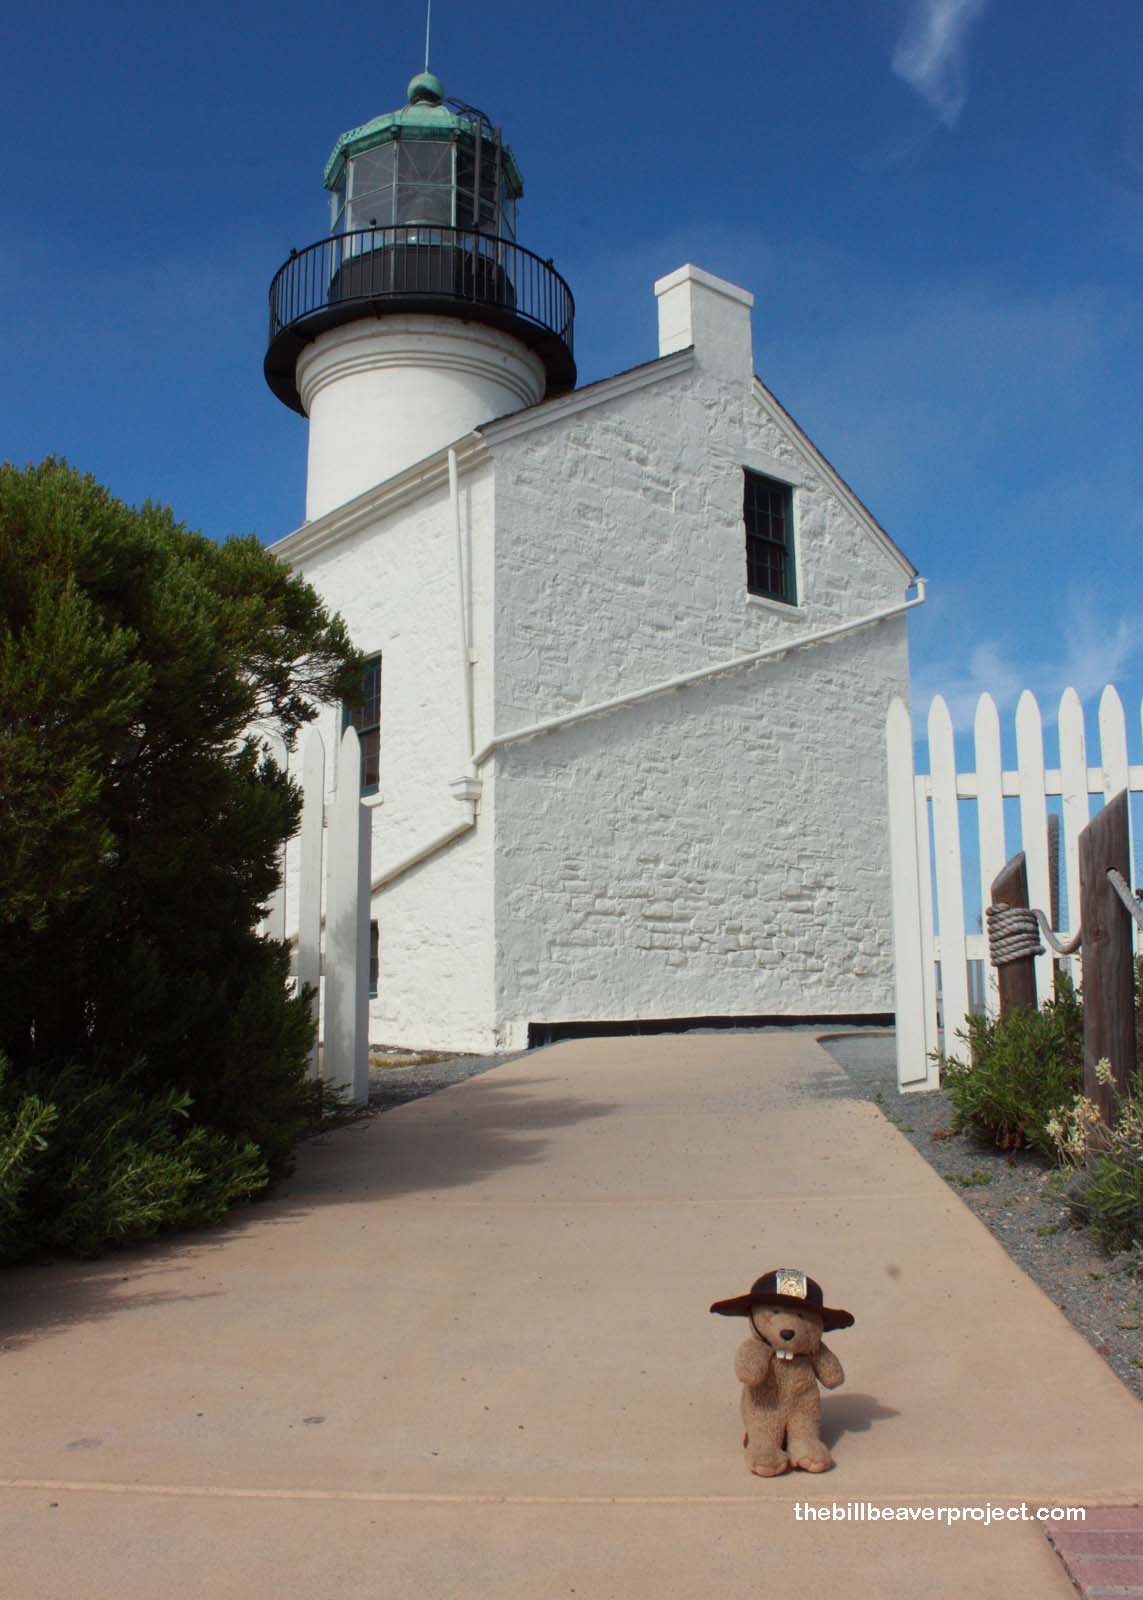 The historic Point Loma Lighthouse!